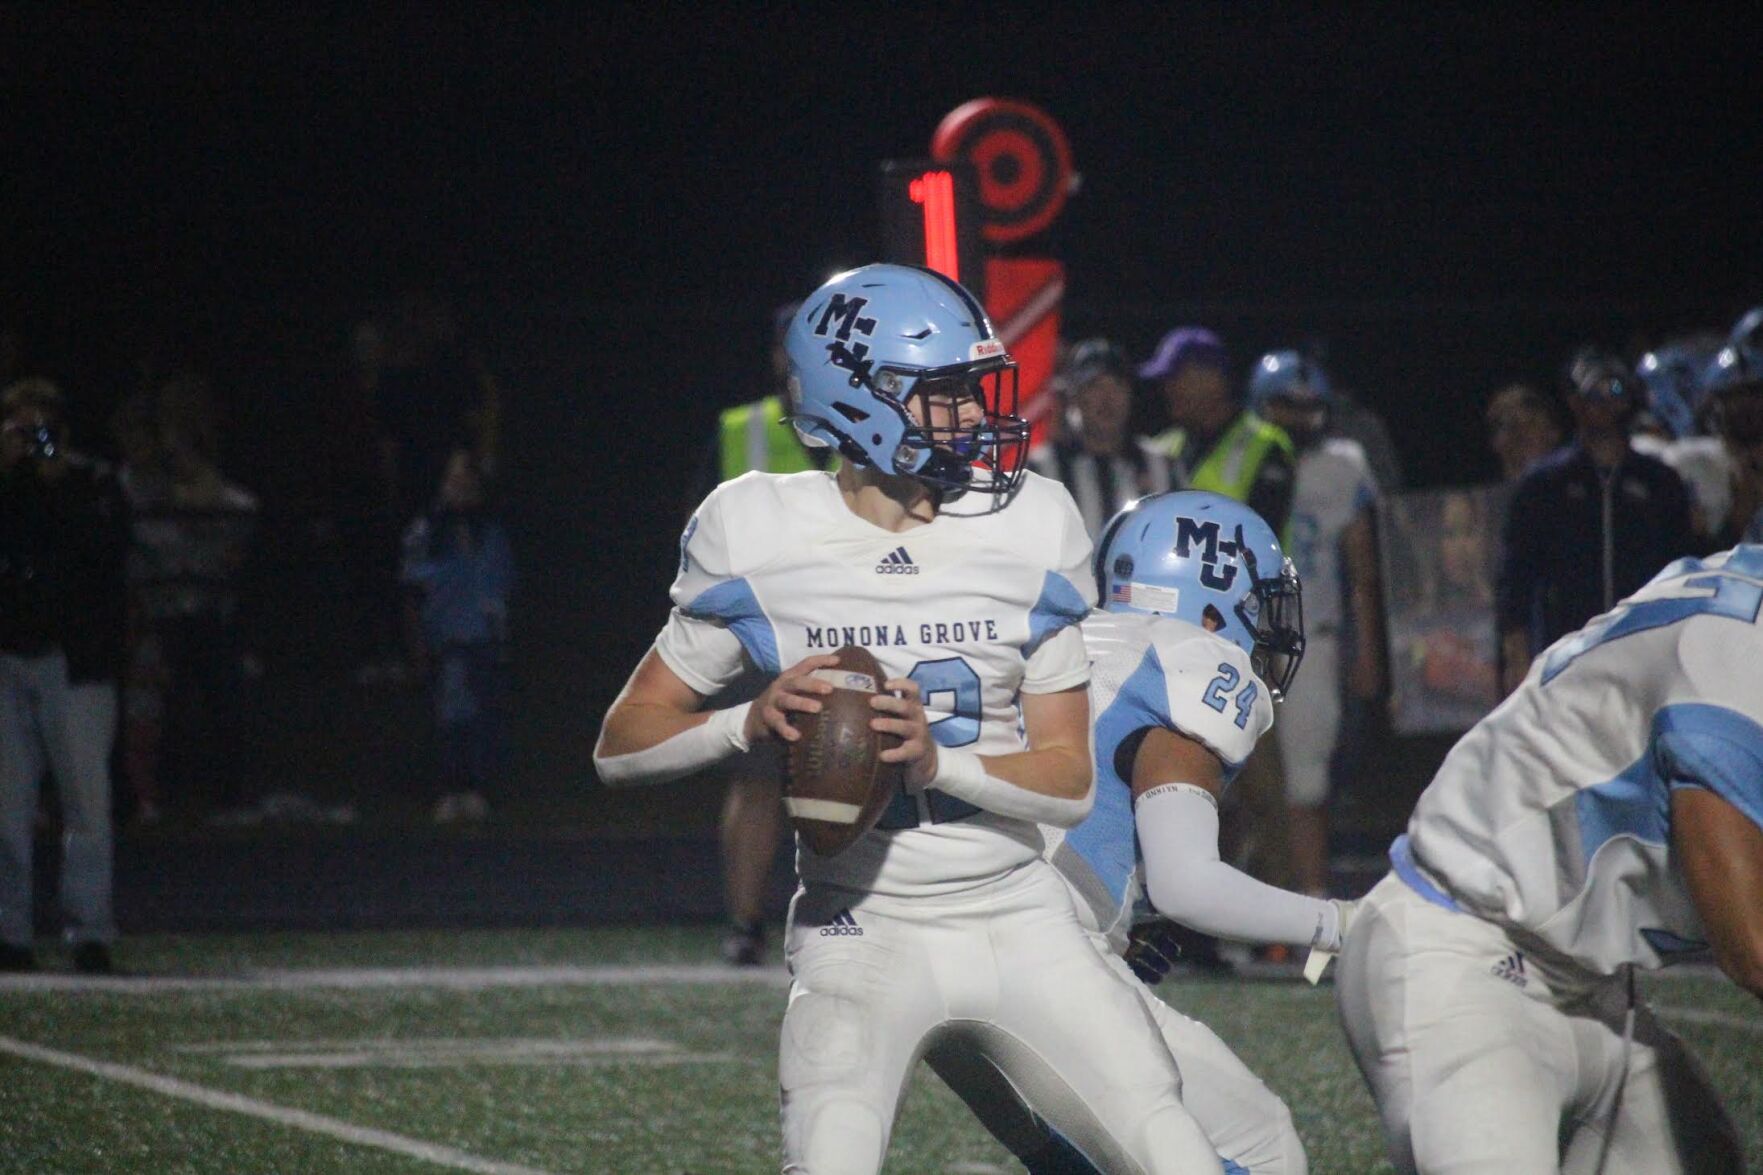 Waunakee Warriors knockout Monona Grove with 63-0 victory and standout performances on offense